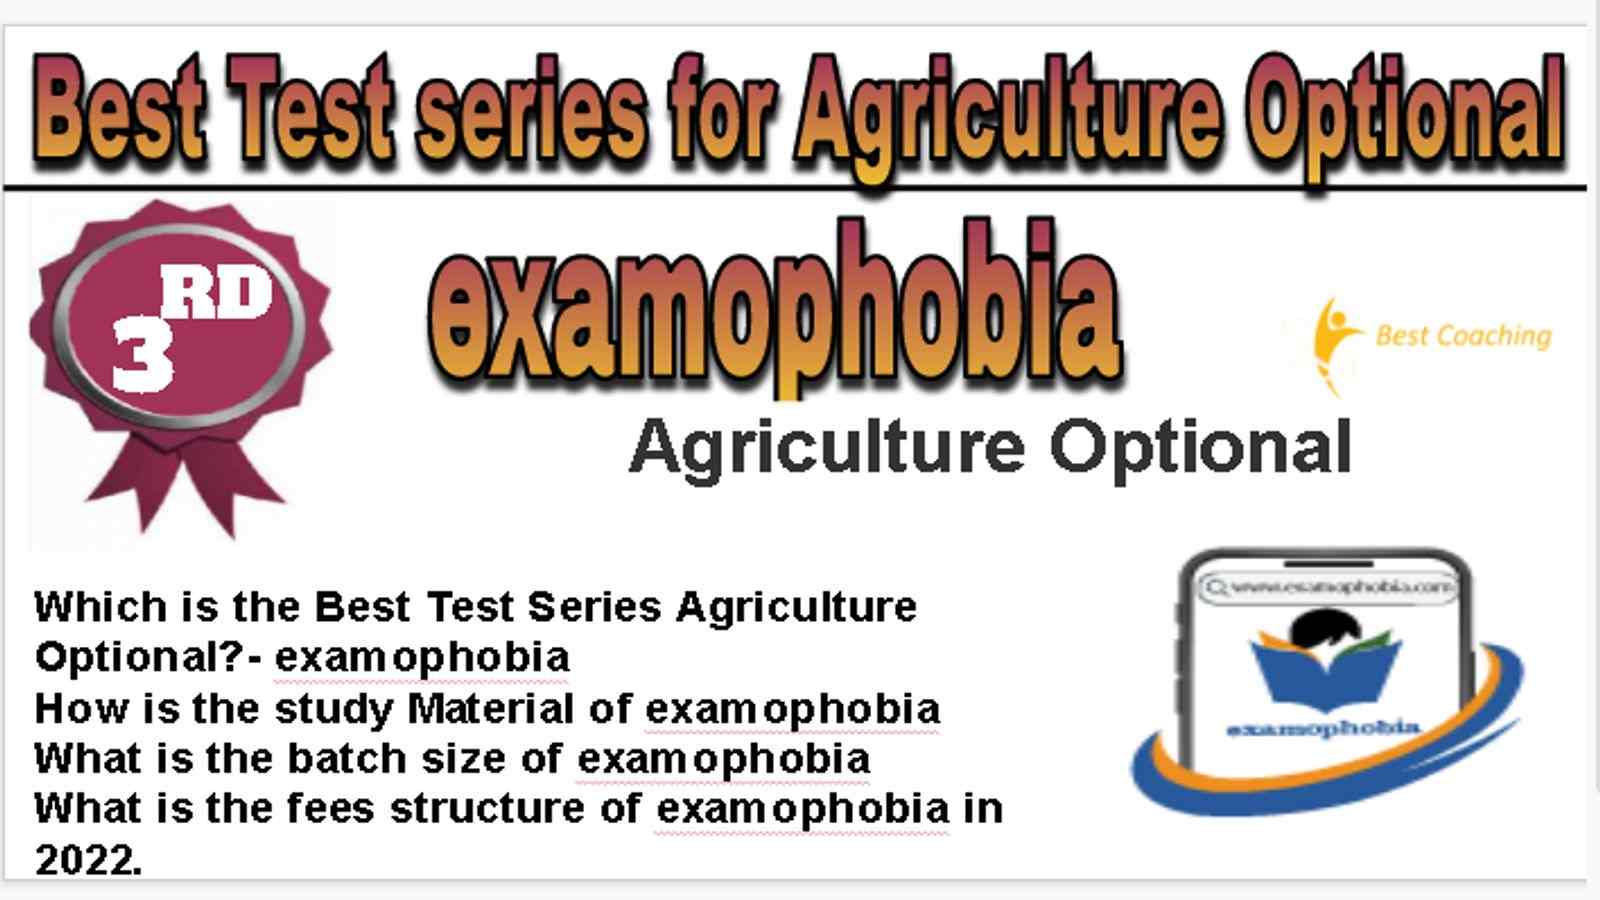 Rank 3 Best Test series for Agriculture Optional